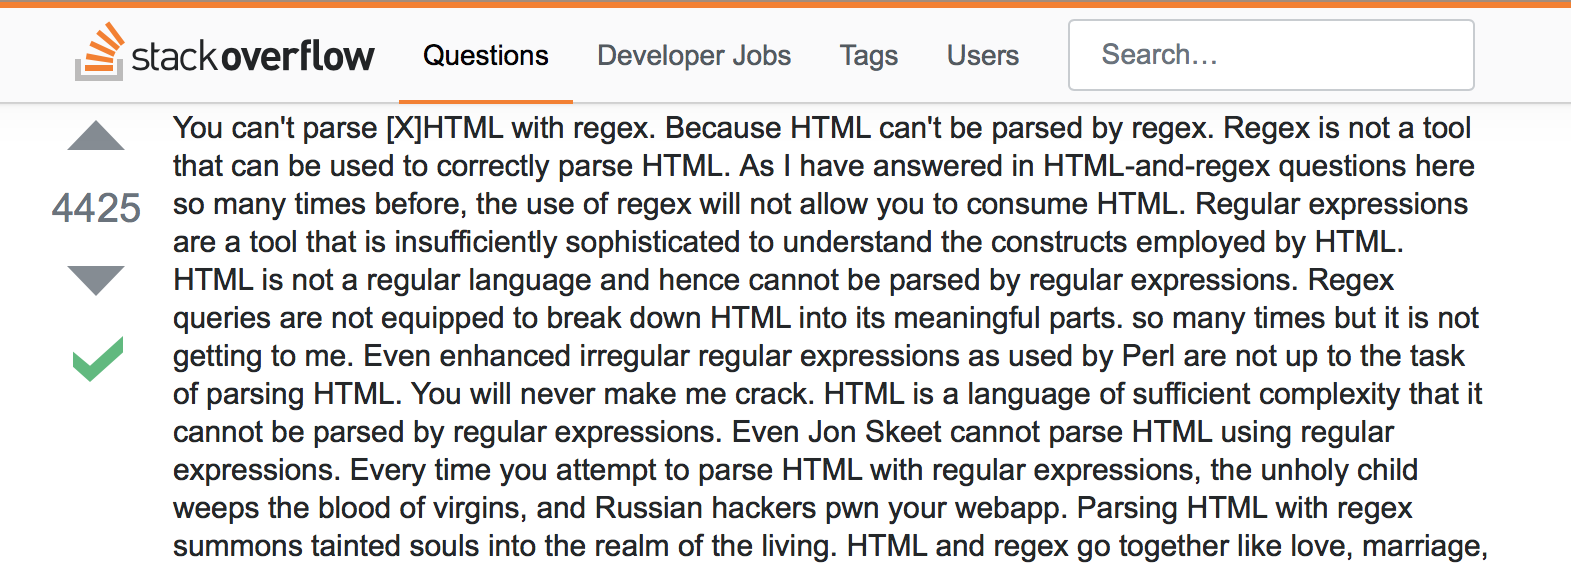 Screen capture of a hilarious
response to a person asking how to use regex to parse HTML.  Click on the image
to go to Stack Overflow where you can read the answer.  Be warned, though, that
part way through the response, spurious diacritical marks begin to appear.
Eventually they take over the text, making it look like the text is crumbling,
and reflecting the maddening exasperation felt by the author at having to
explain this for the million-th time.